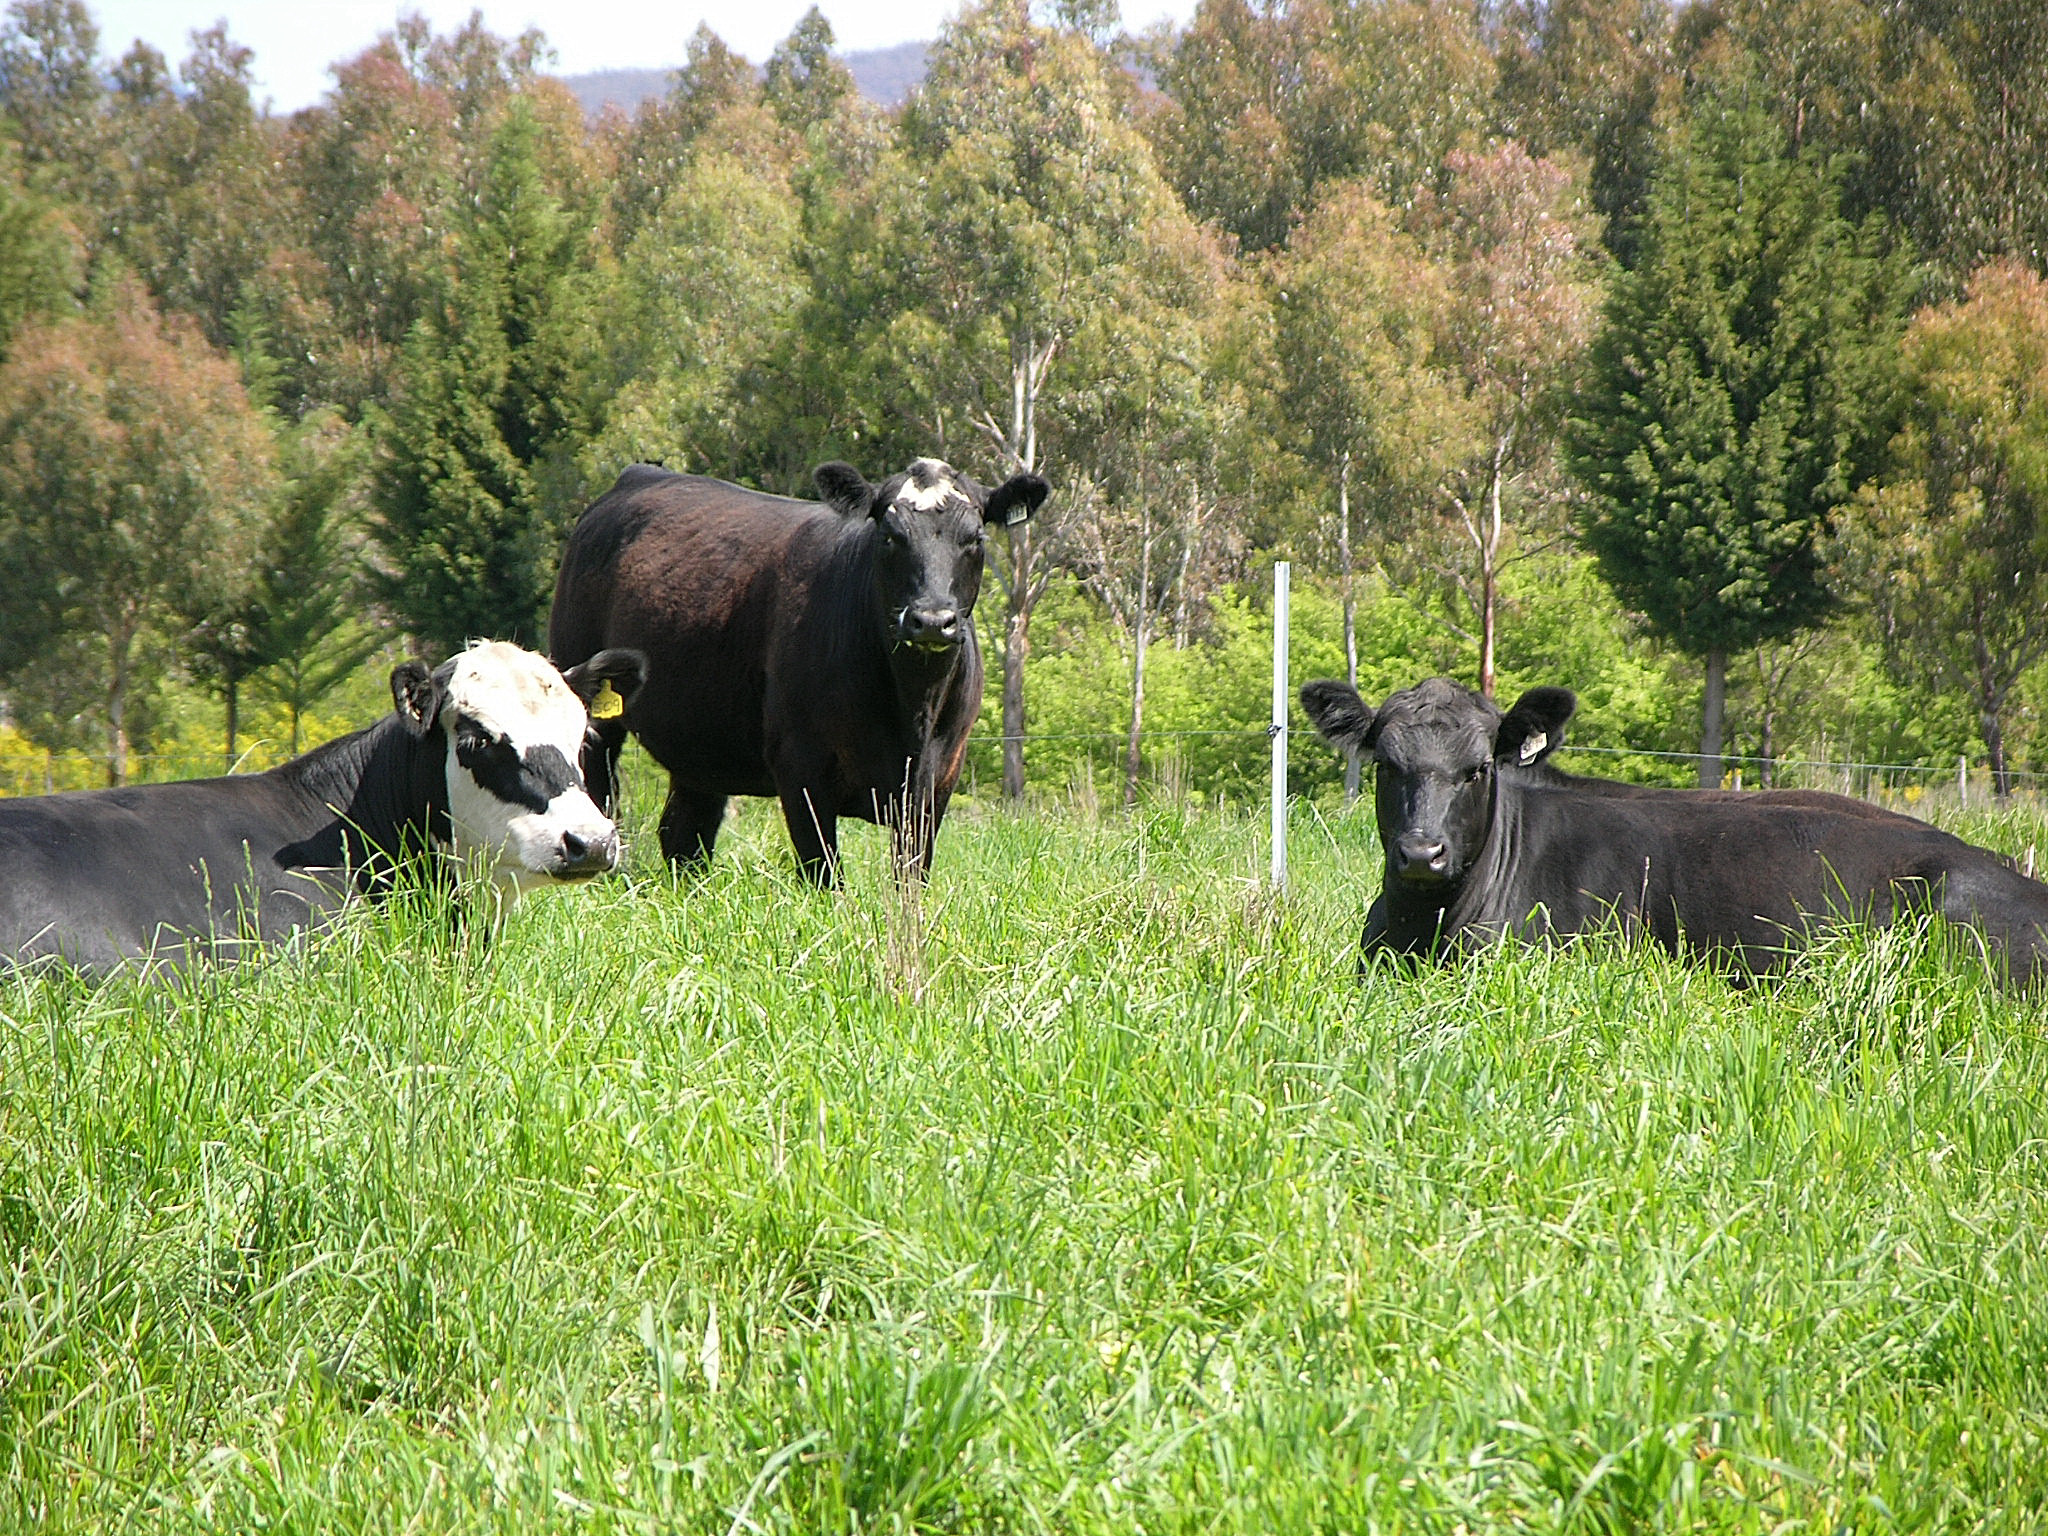 Comfortable livestock are always content in their paddocks